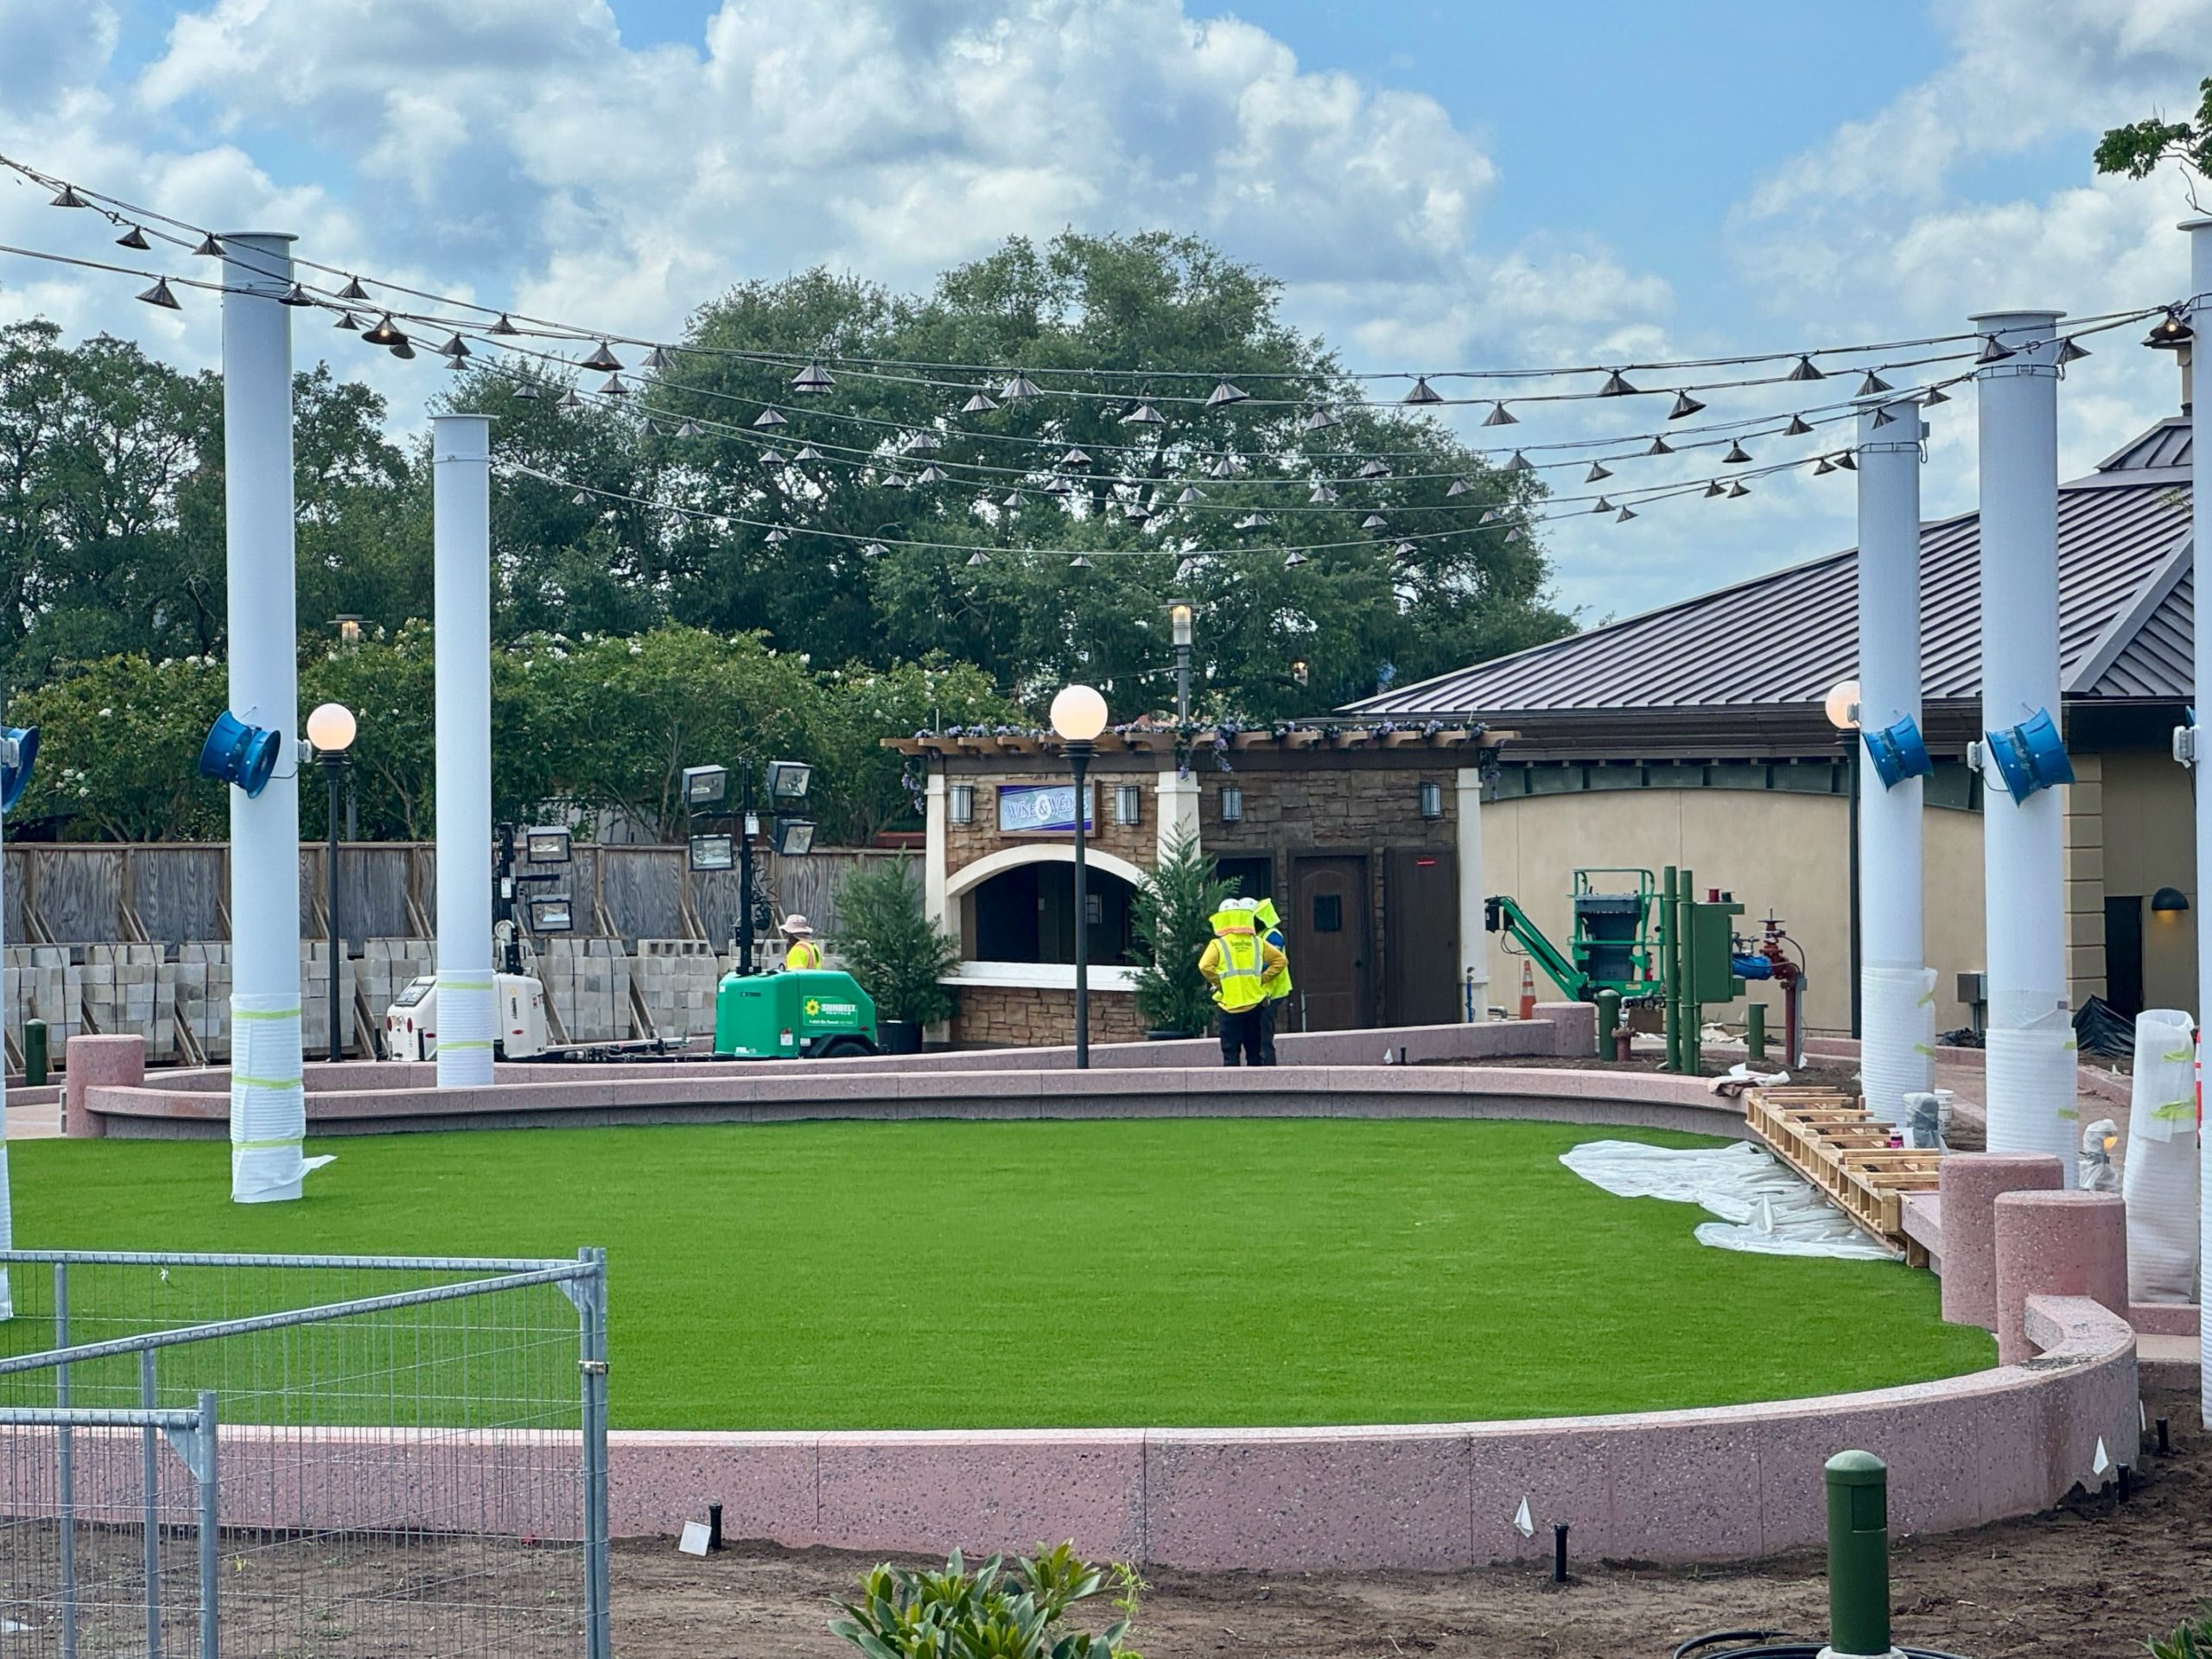 Festival Booth and Lighting Installed at Flex Space in EPCOT